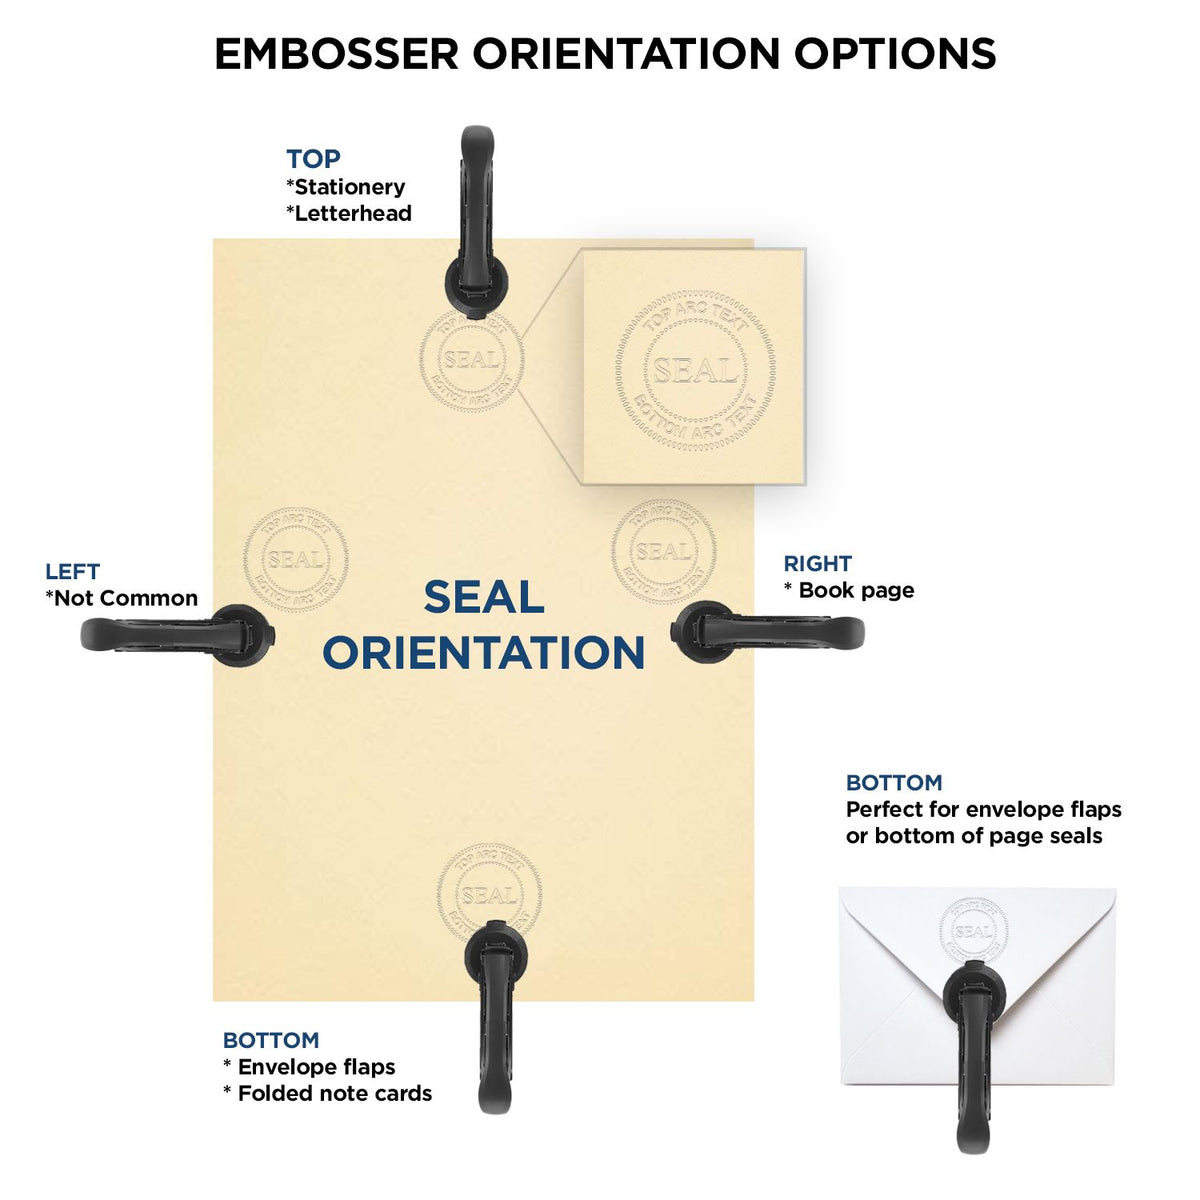 An infographic for the Handheld Idaho Professional Engineer Embosser showing embosser orientation, this is showing examples of a top, bottom, right and left insert.